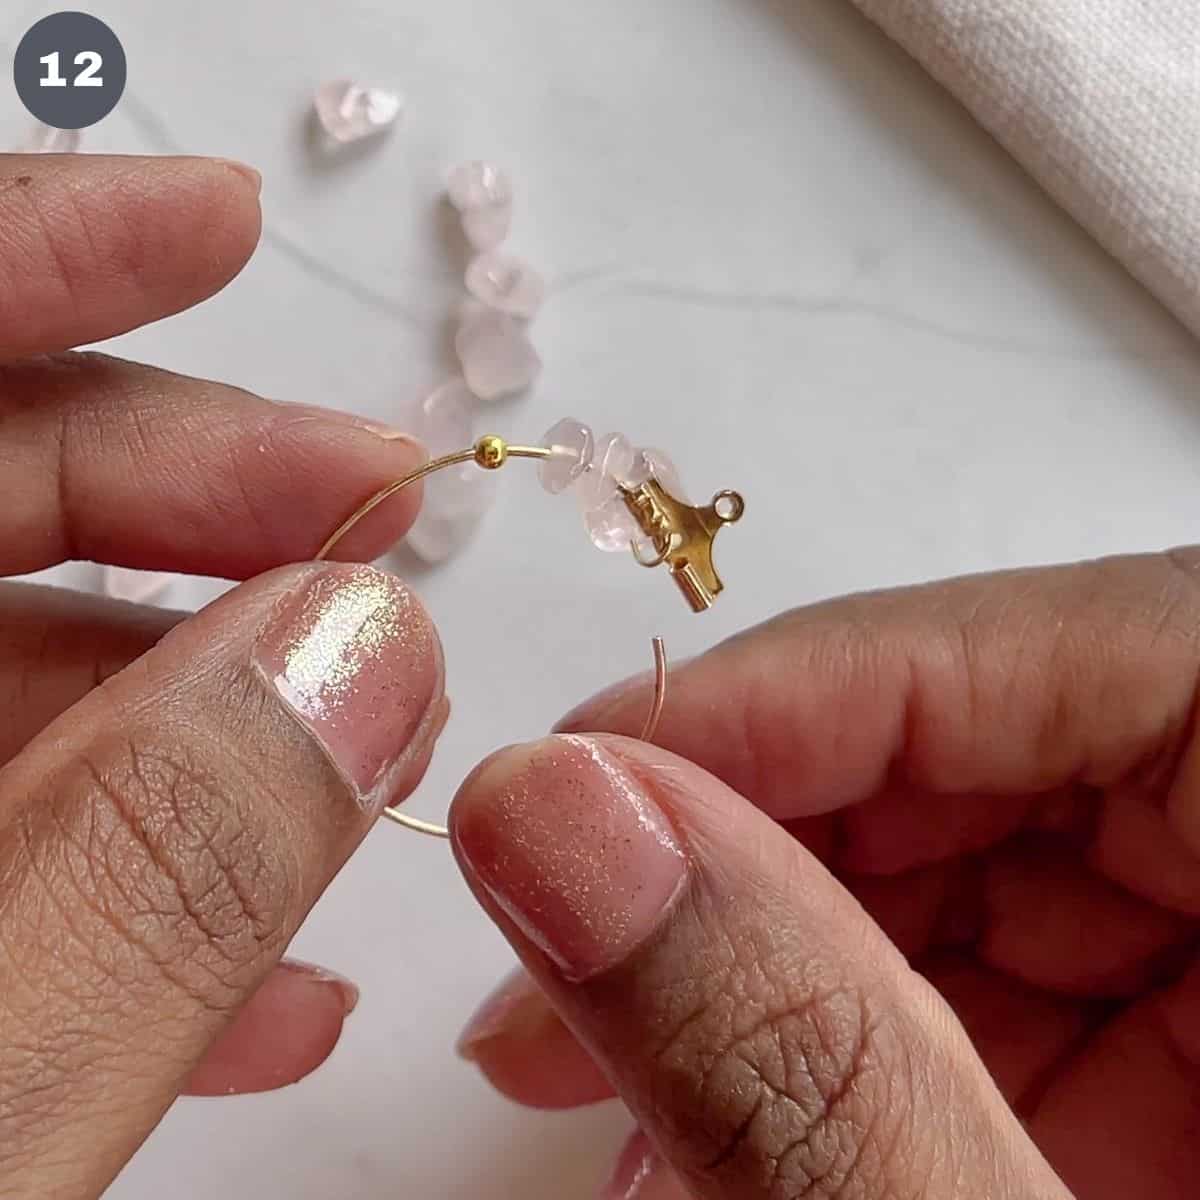 Inserting a gold bead into a hoop.